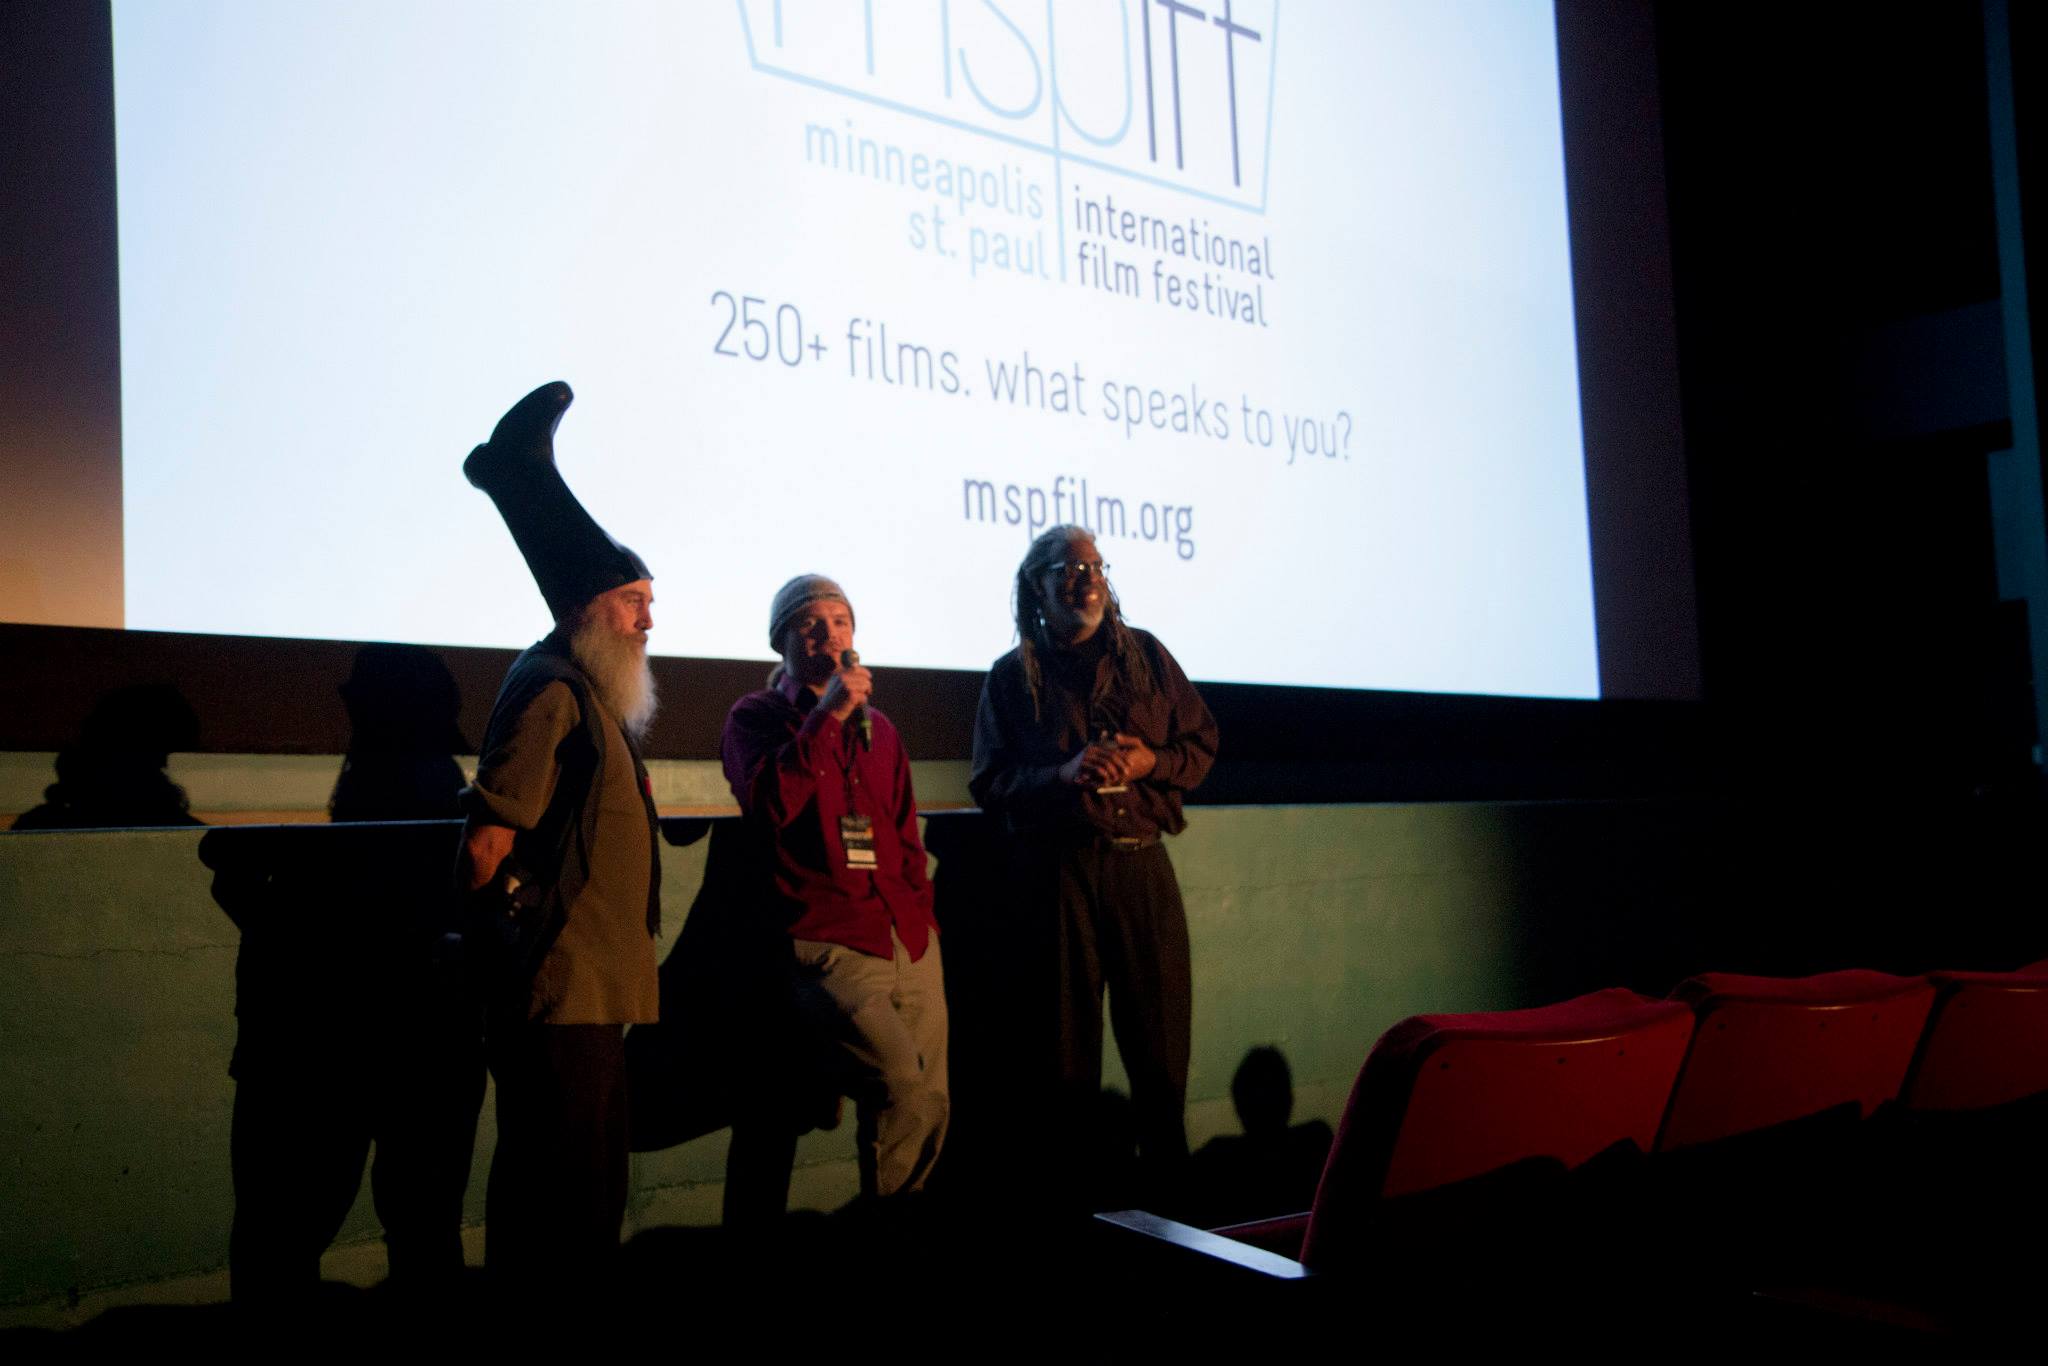 Steve Onderick field questions about Who Is Vermin Supreme? An Outsider Odyssey at the 2014 Minneapolis - St. Paul International Film Festival